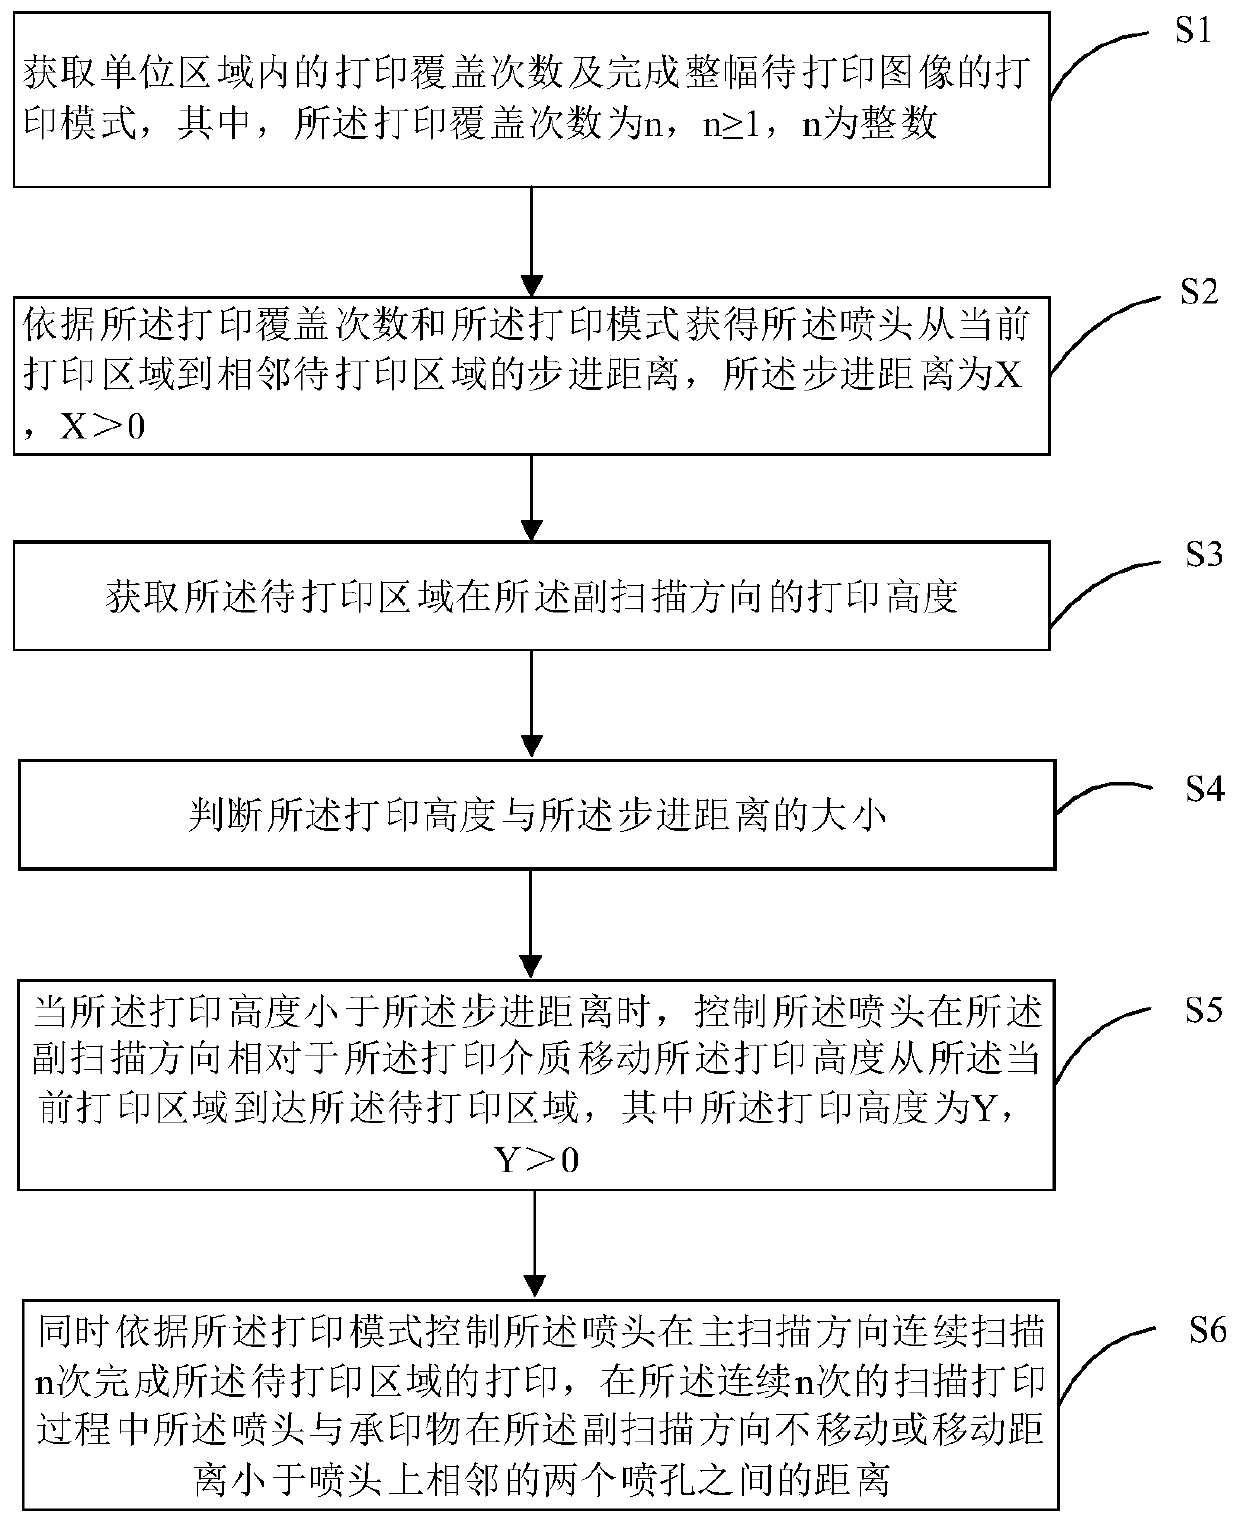 Reciprocating type scanning printing control method and device, equipment and storage medium